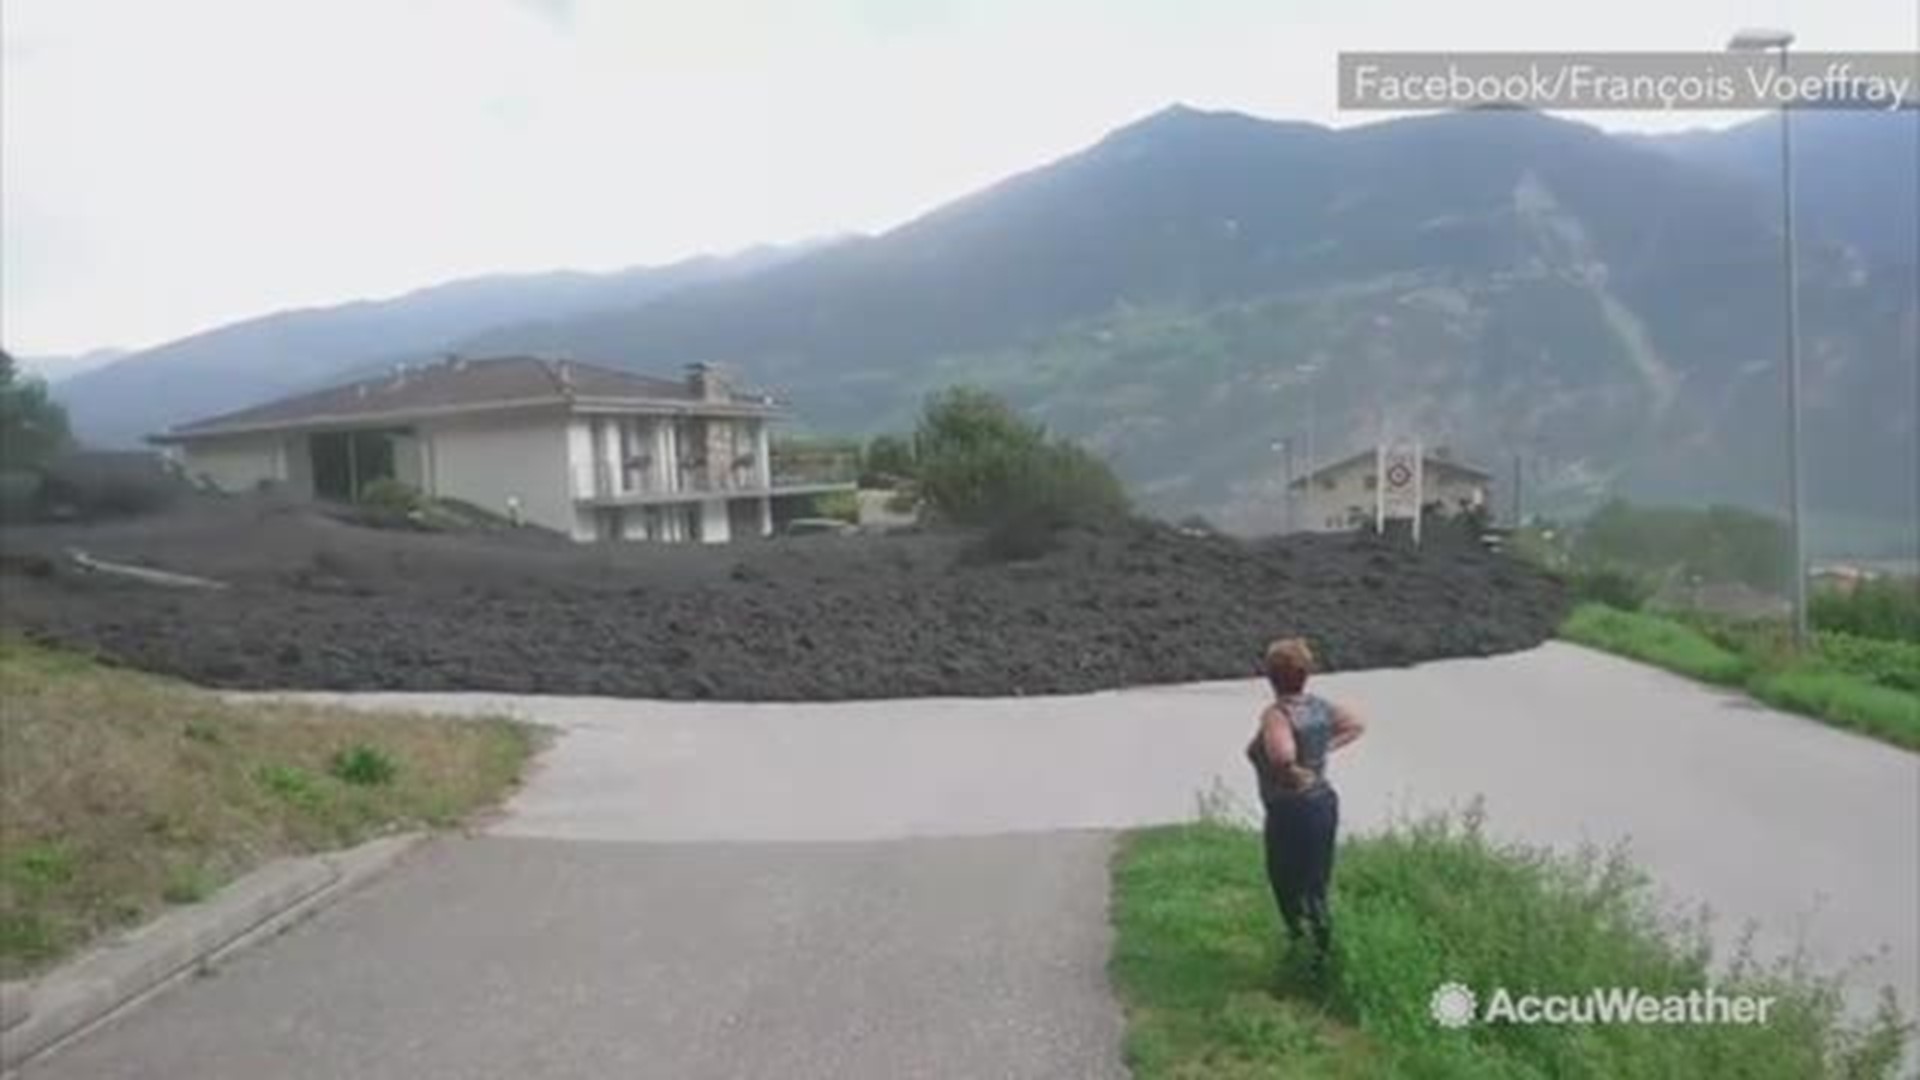 Dramatic footage shows a huge mud flow hit Chamoson, Switzerland on August 7. 